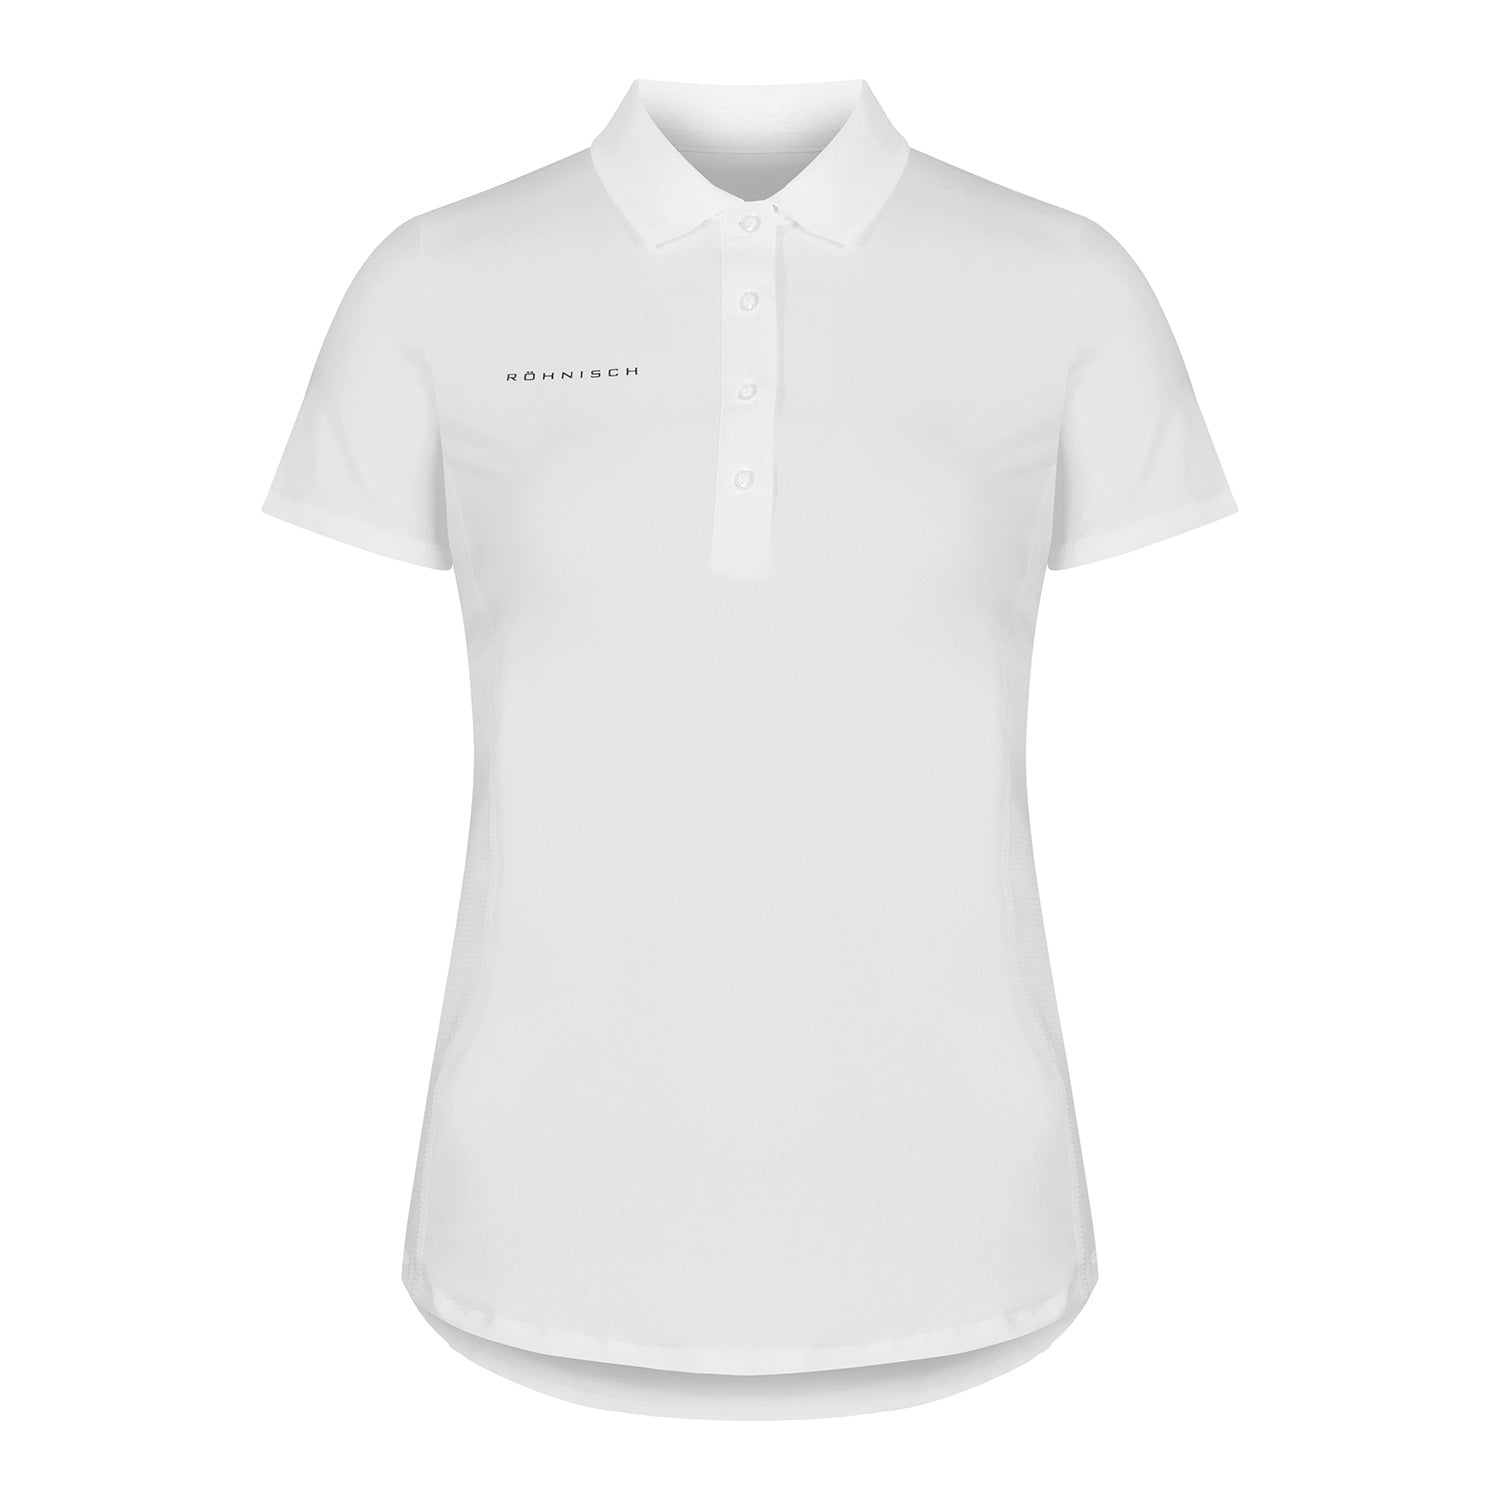 Rohnisch Women's Short Sleeve Polo with Textured Panels in White